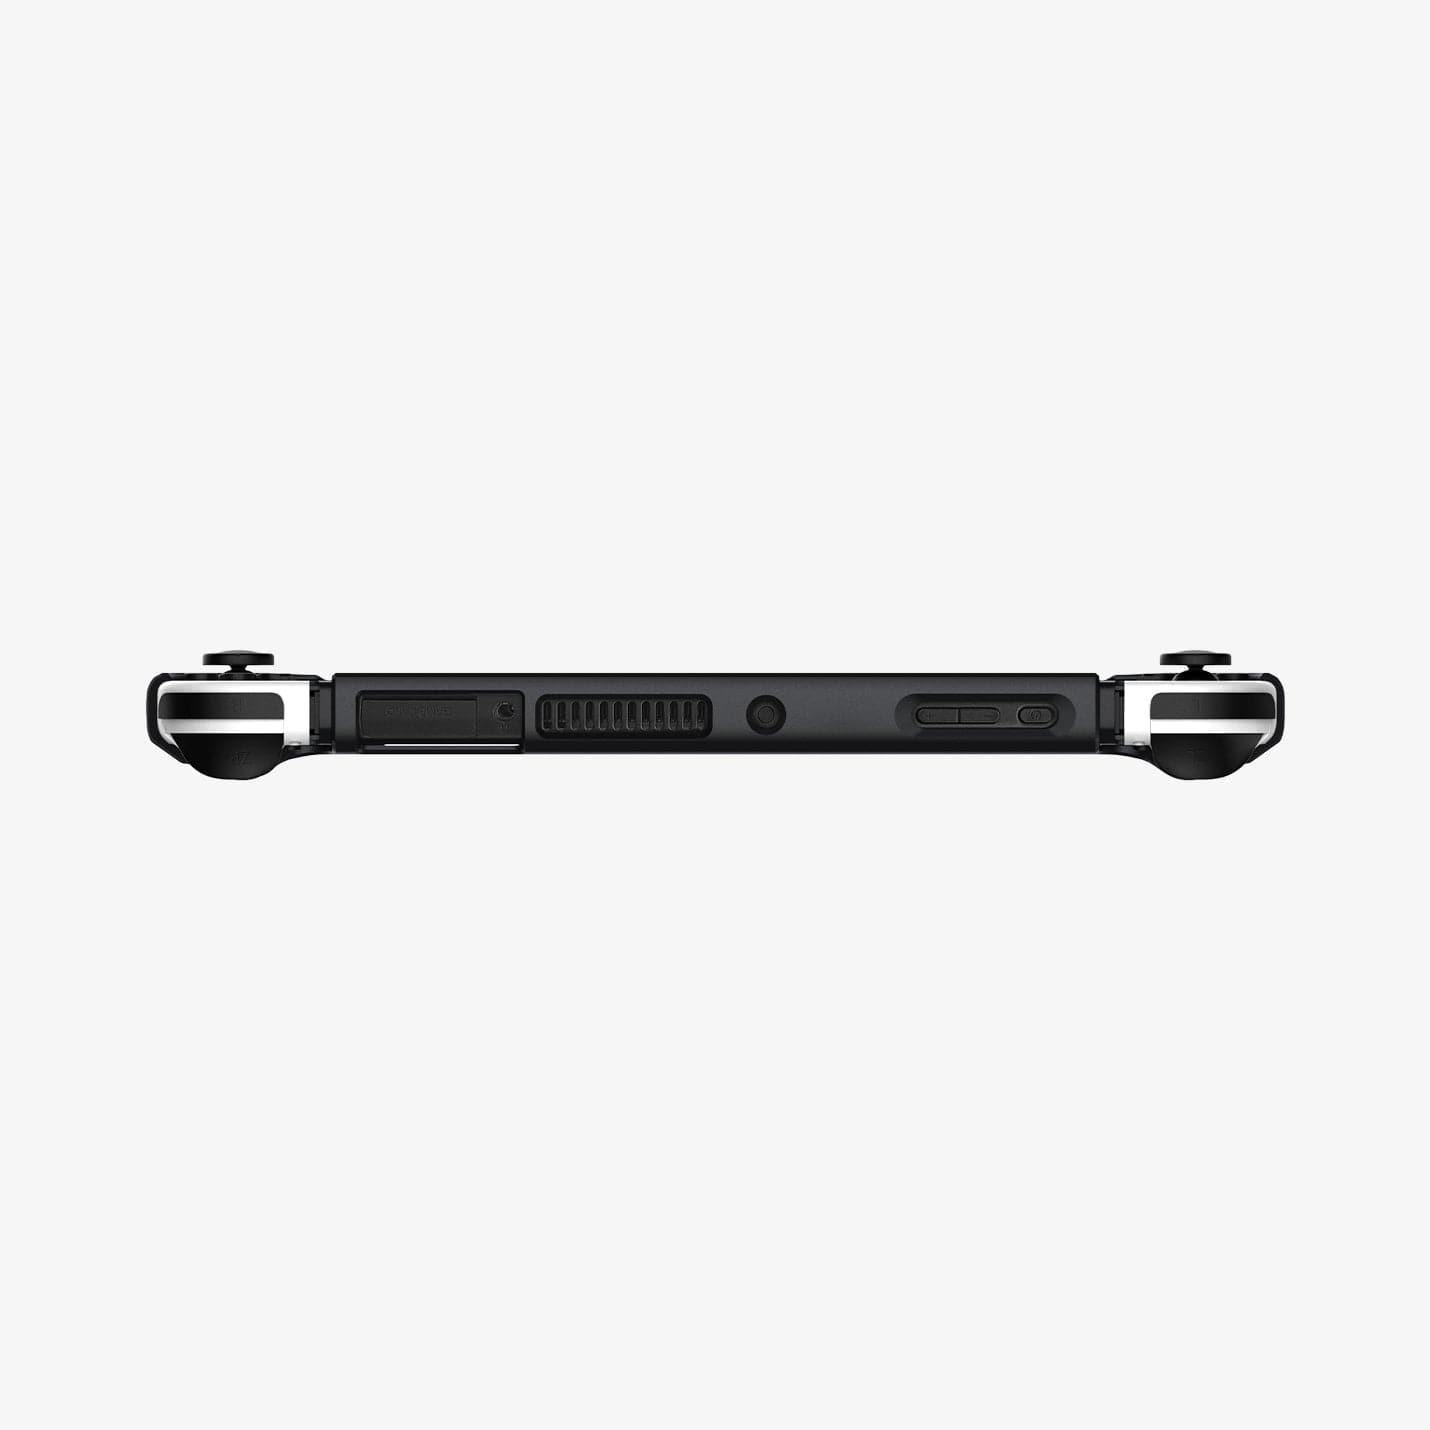 ACS04239 - Nintendo Switch OLED Case Thin Fit in black showing the top